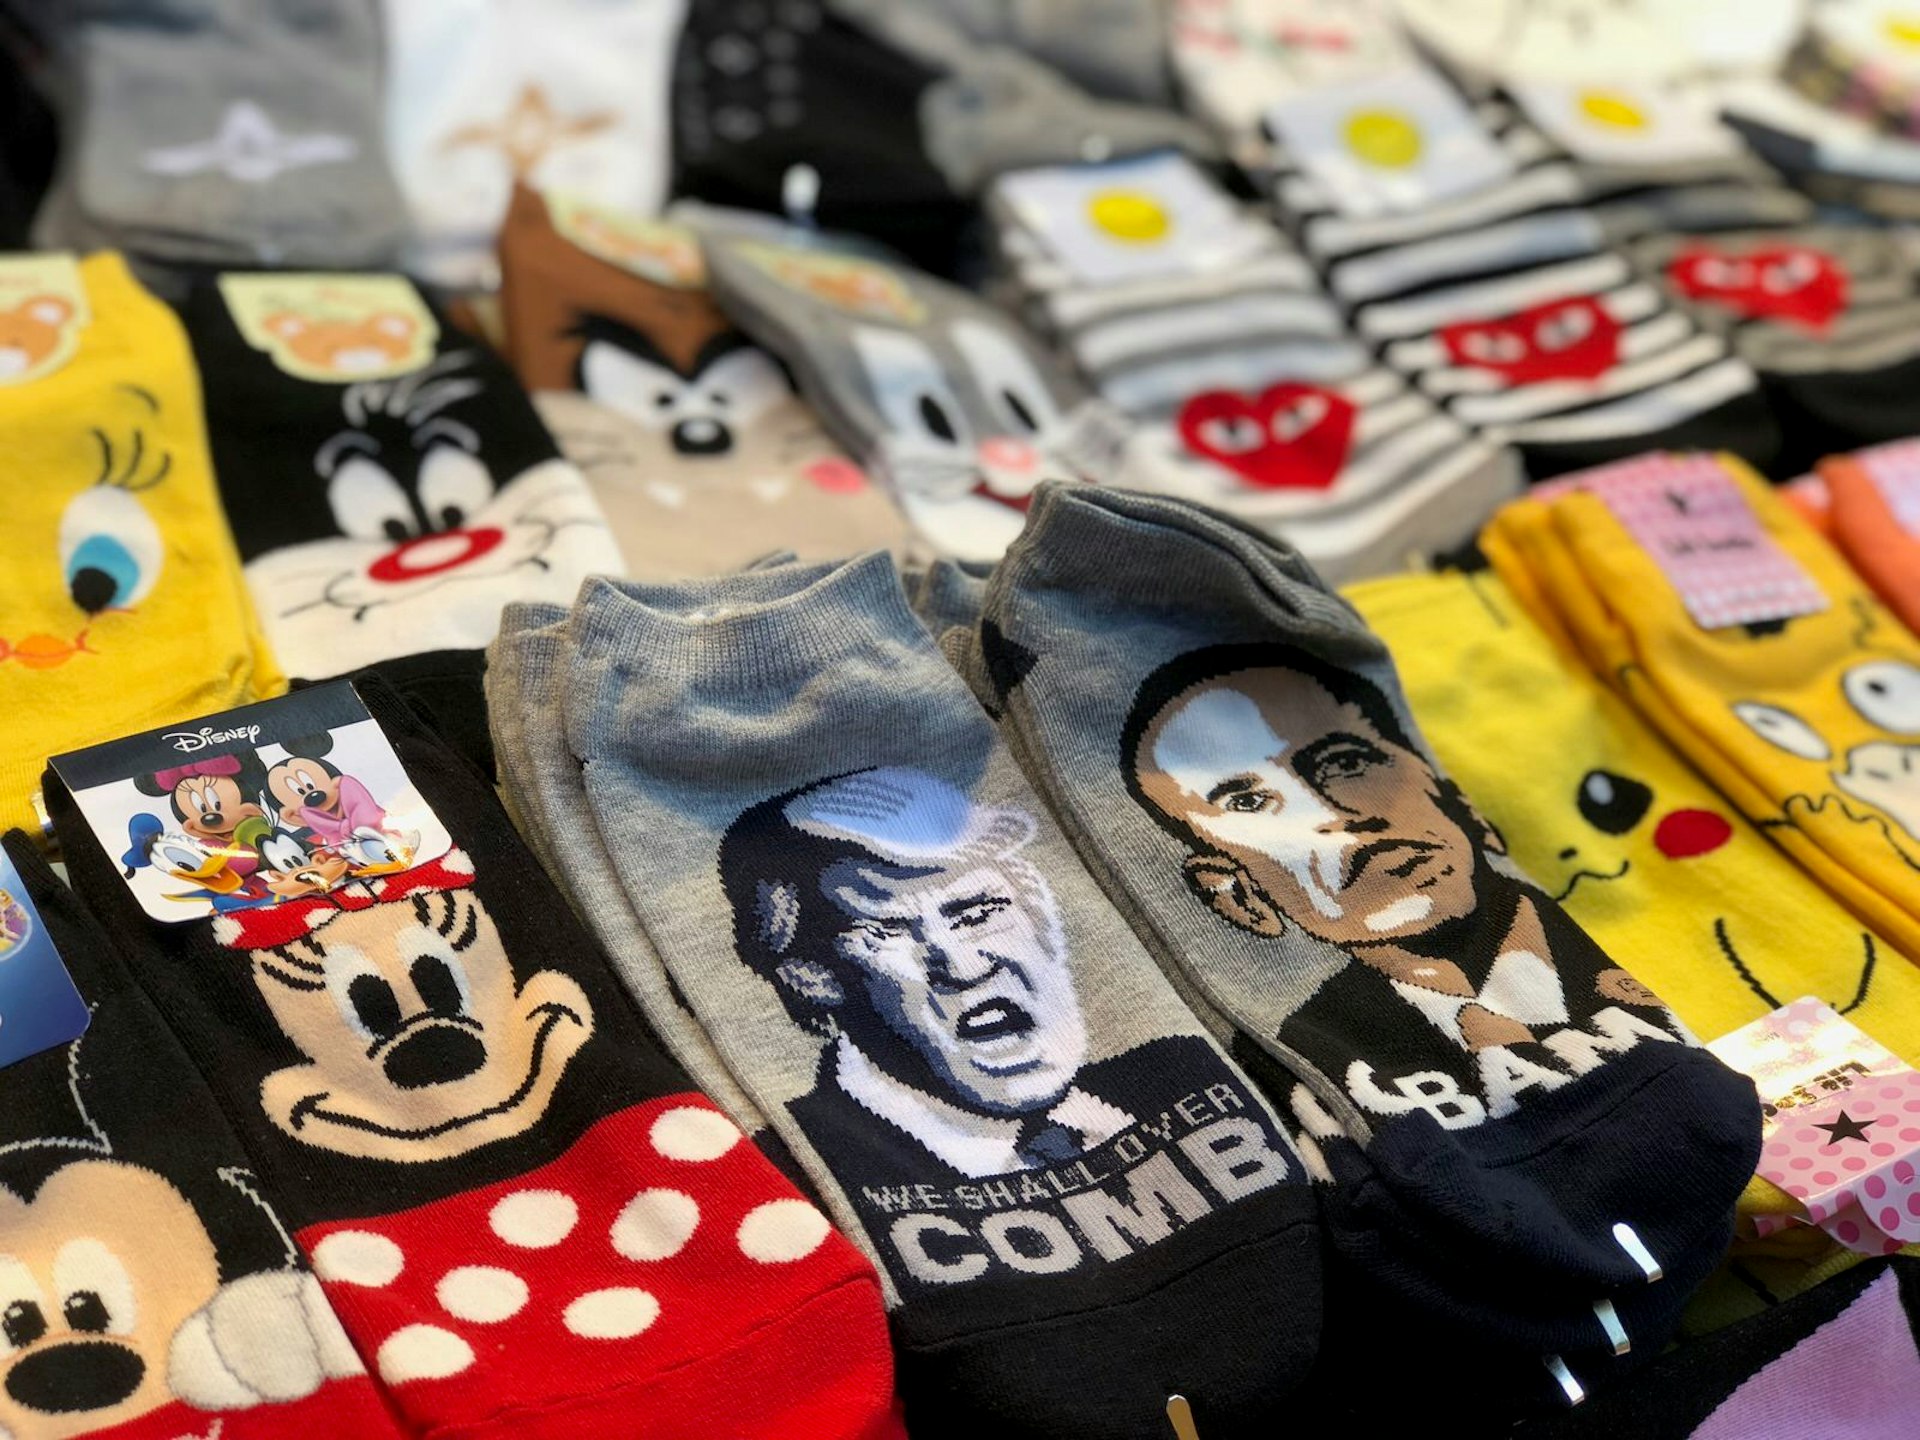 Pairs of socks depicting Minnie Mouse, Donald Trump, Barack Obama and several Loony Toons characters